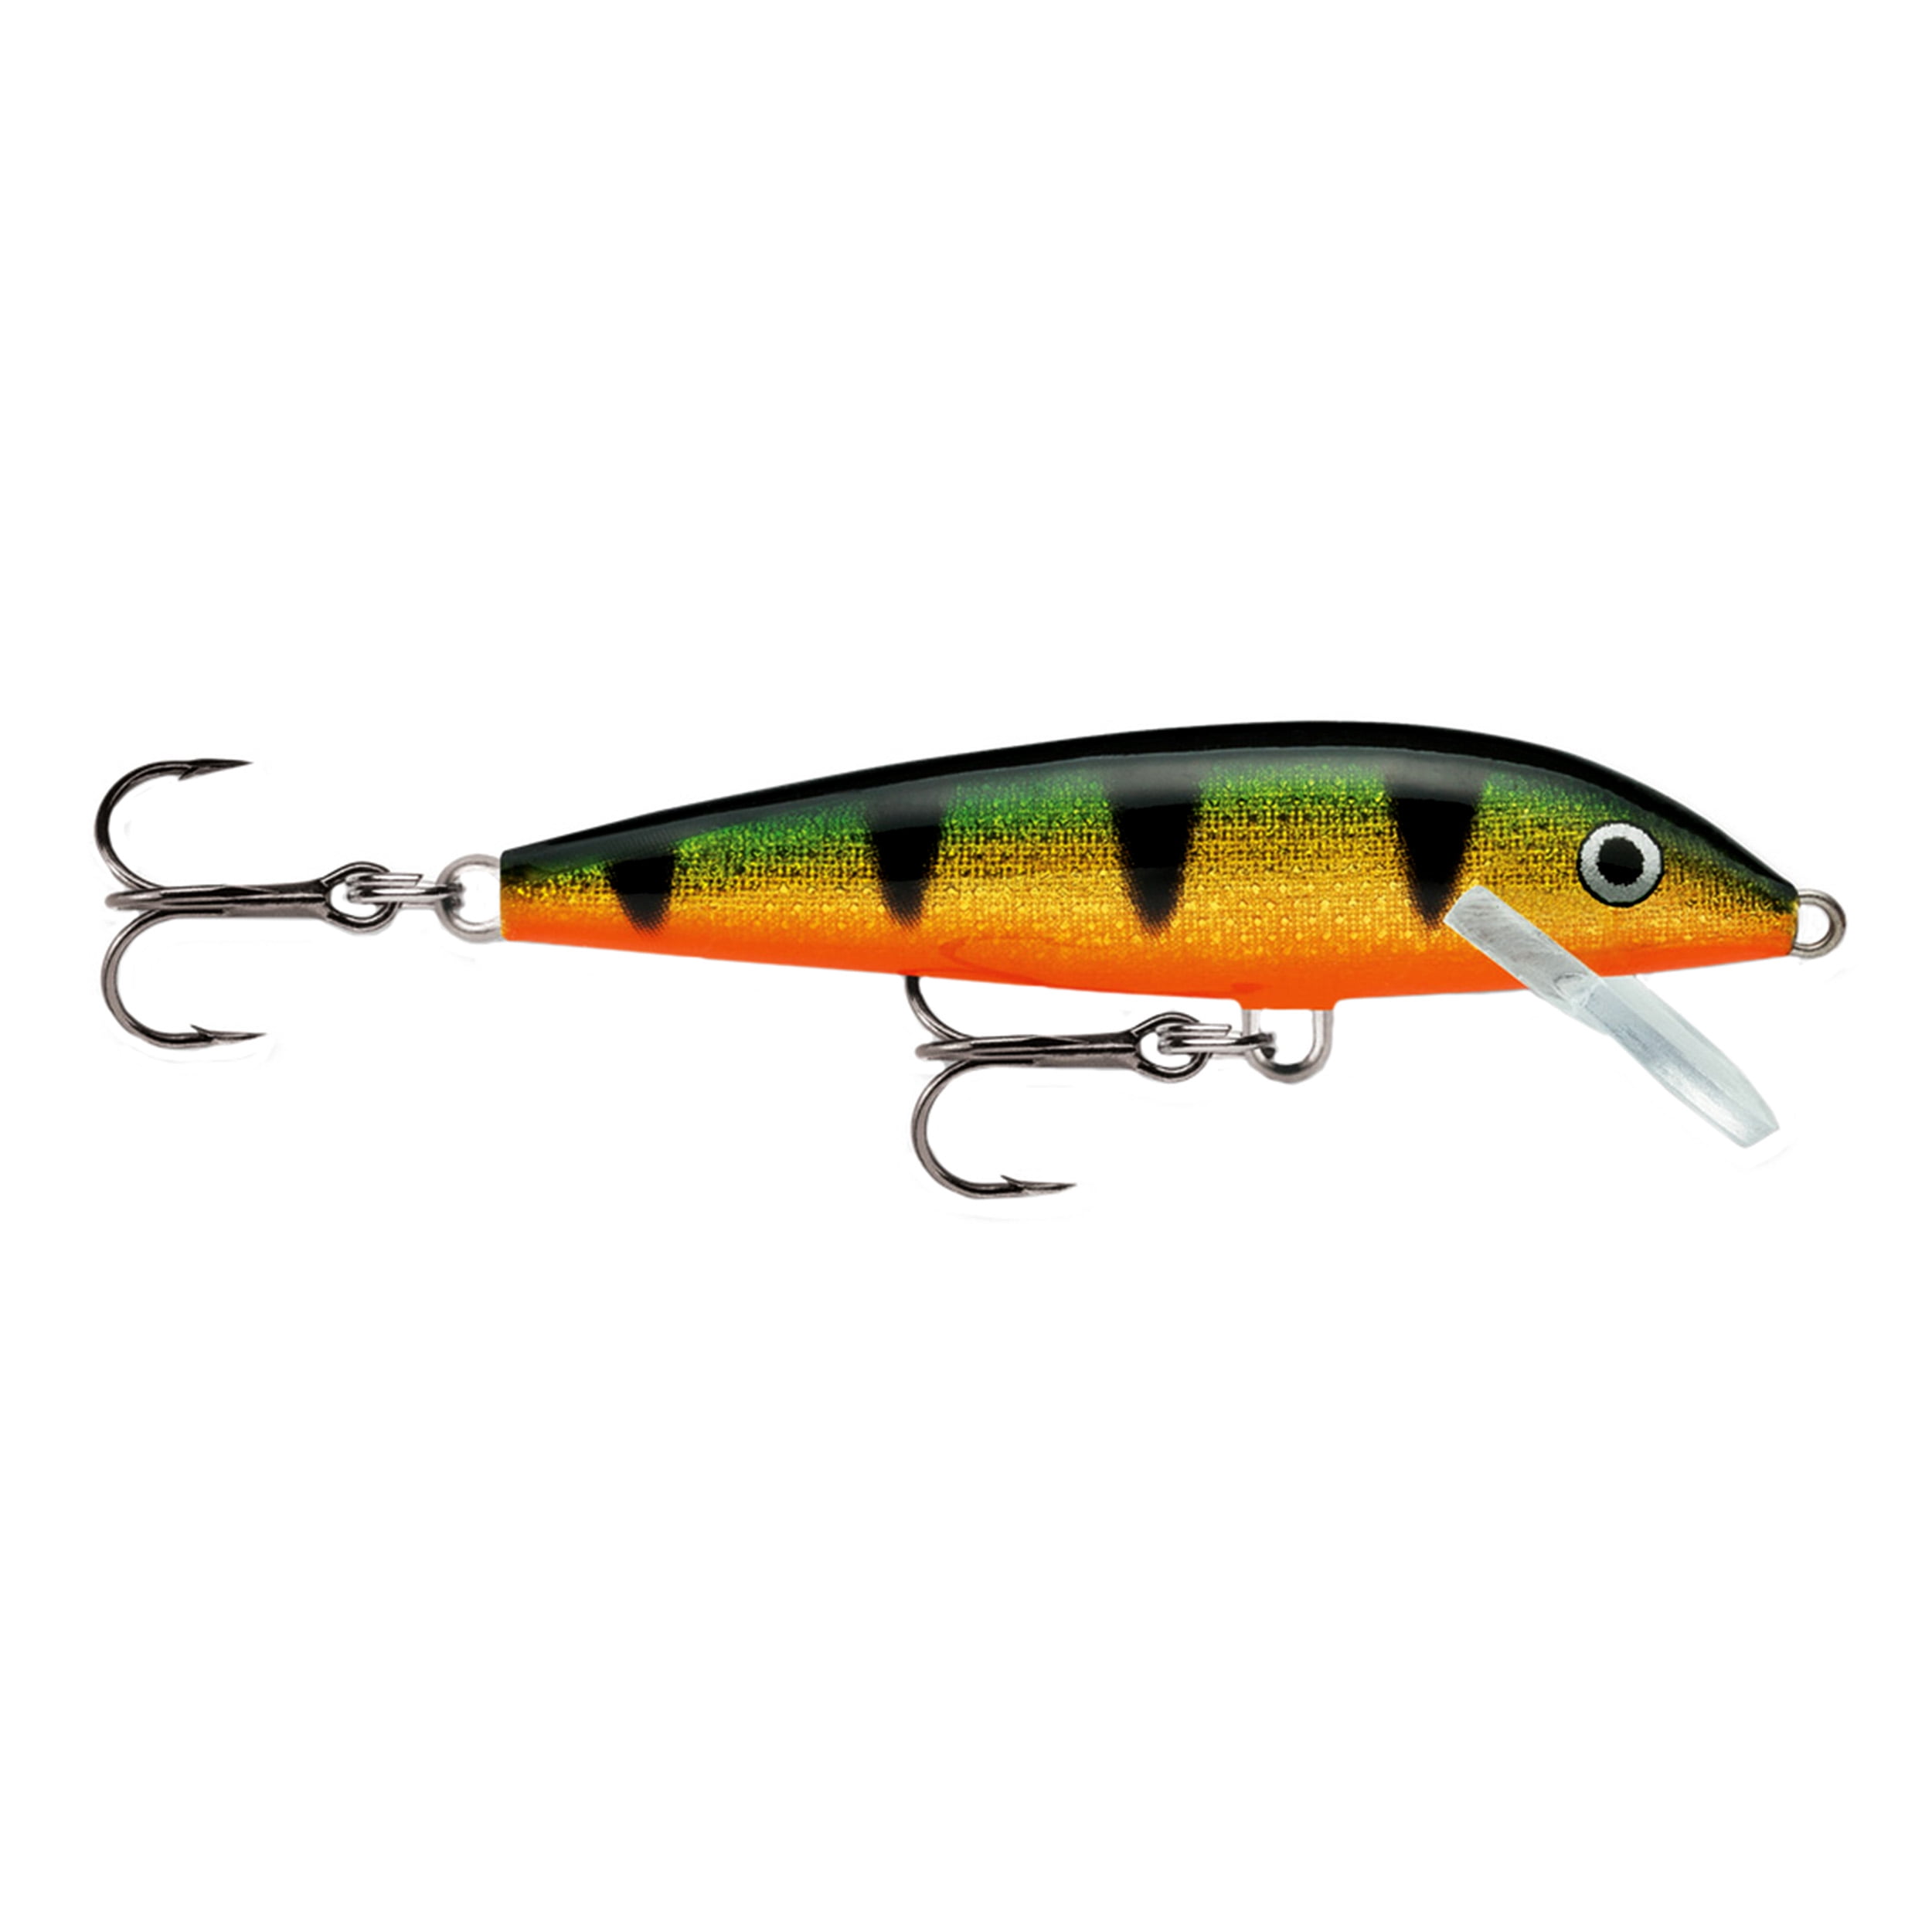 2 St Spinmad we 10 G Colorful Colors Spinnerbait Predator Perch-Lures 